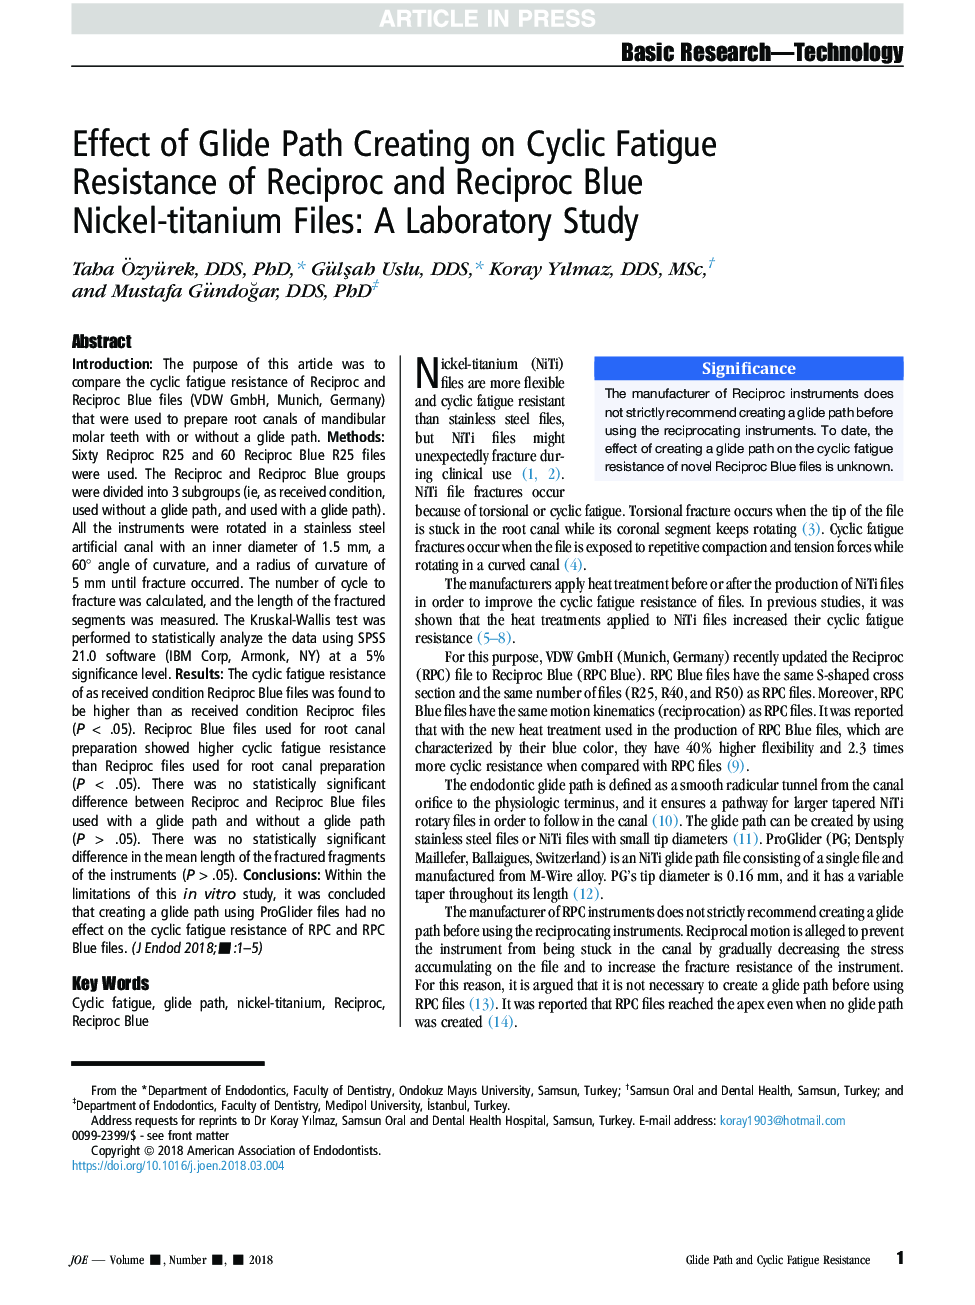 Effect of Glide Path Creating on Cyclic Fatigue Resistance of Reciproc and Reciproc Blue Nickel-titanium Files: A Laboratory Study